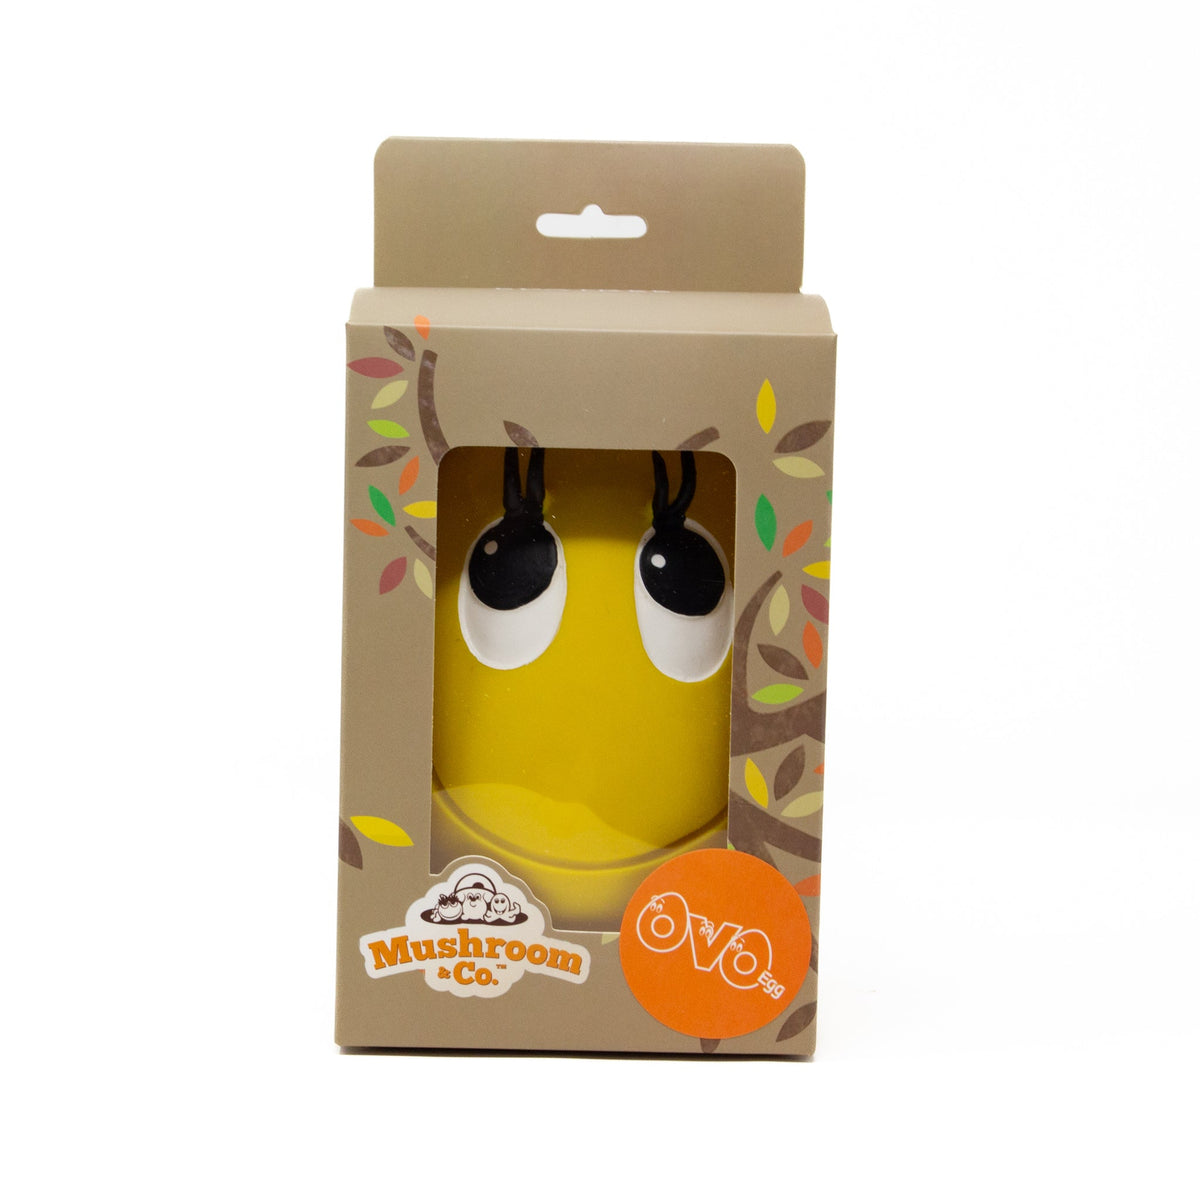 XXL OVO the Egg Yellow - Natural Rubber Toys